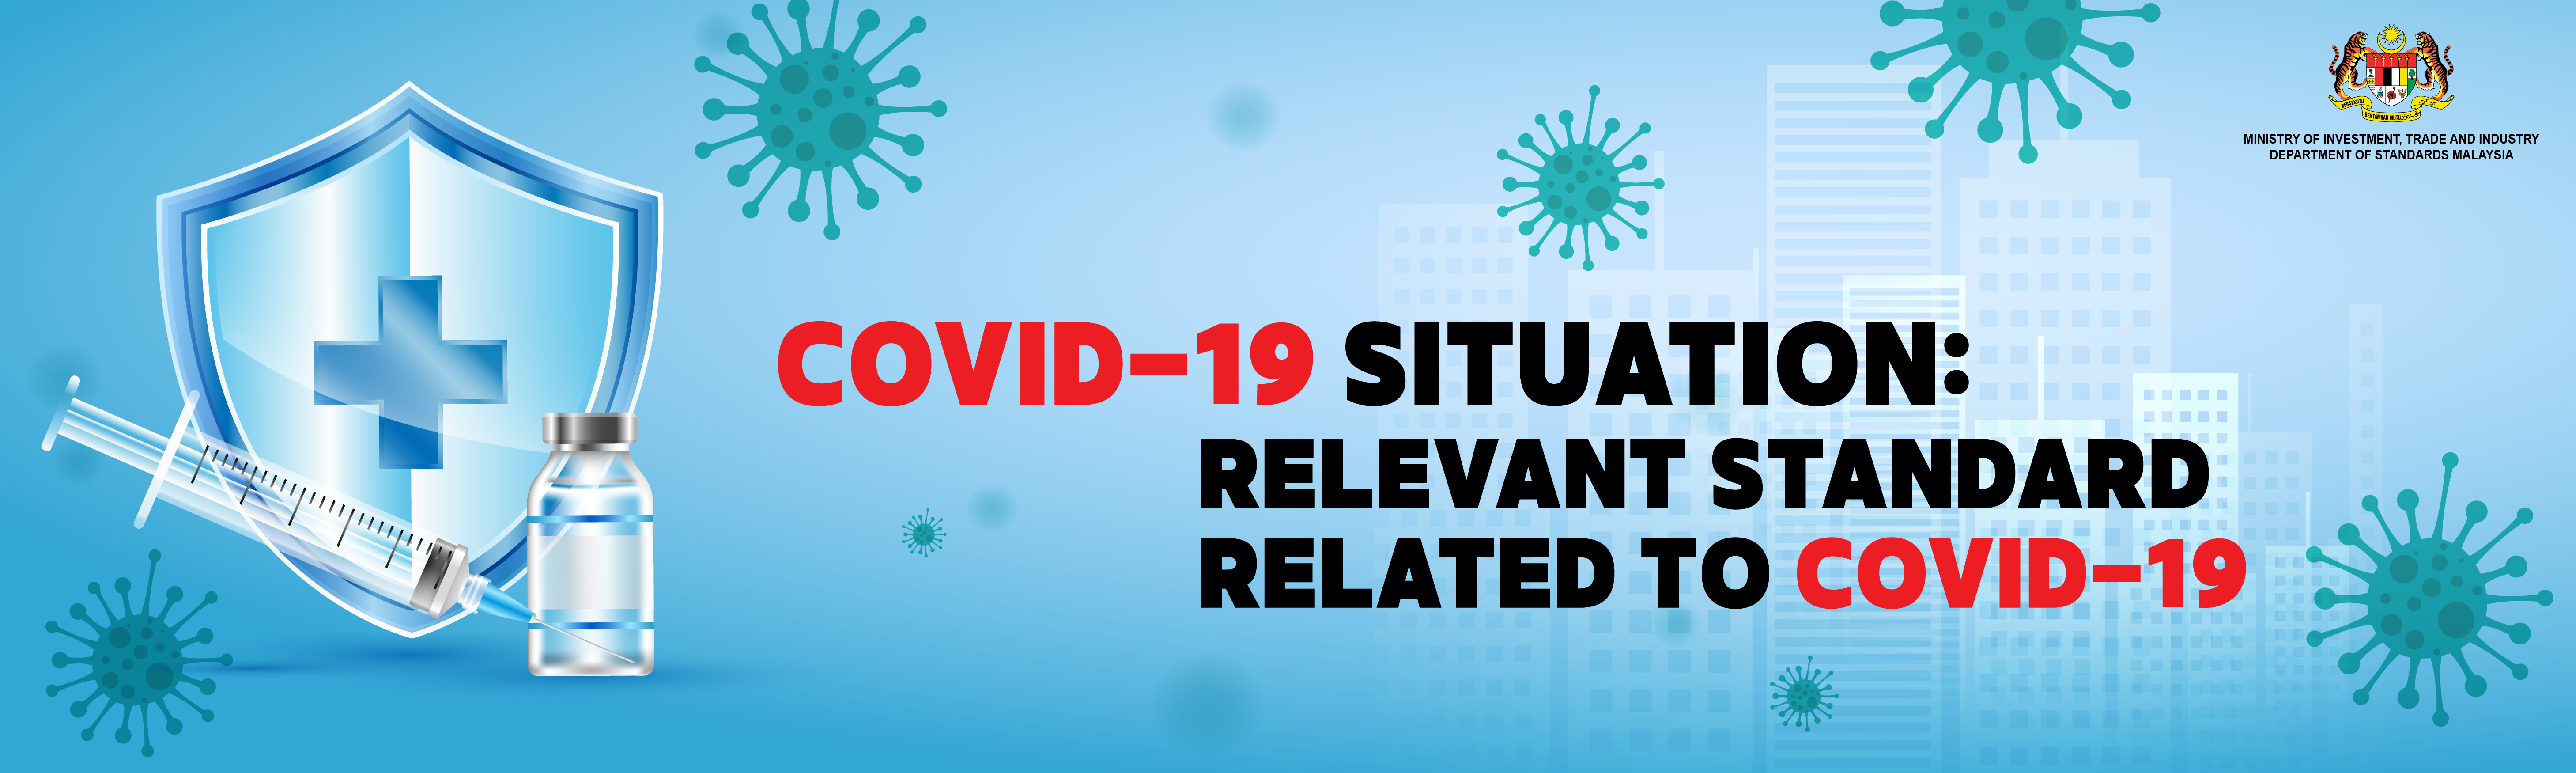 Covid-19 Situation Relevant Standard